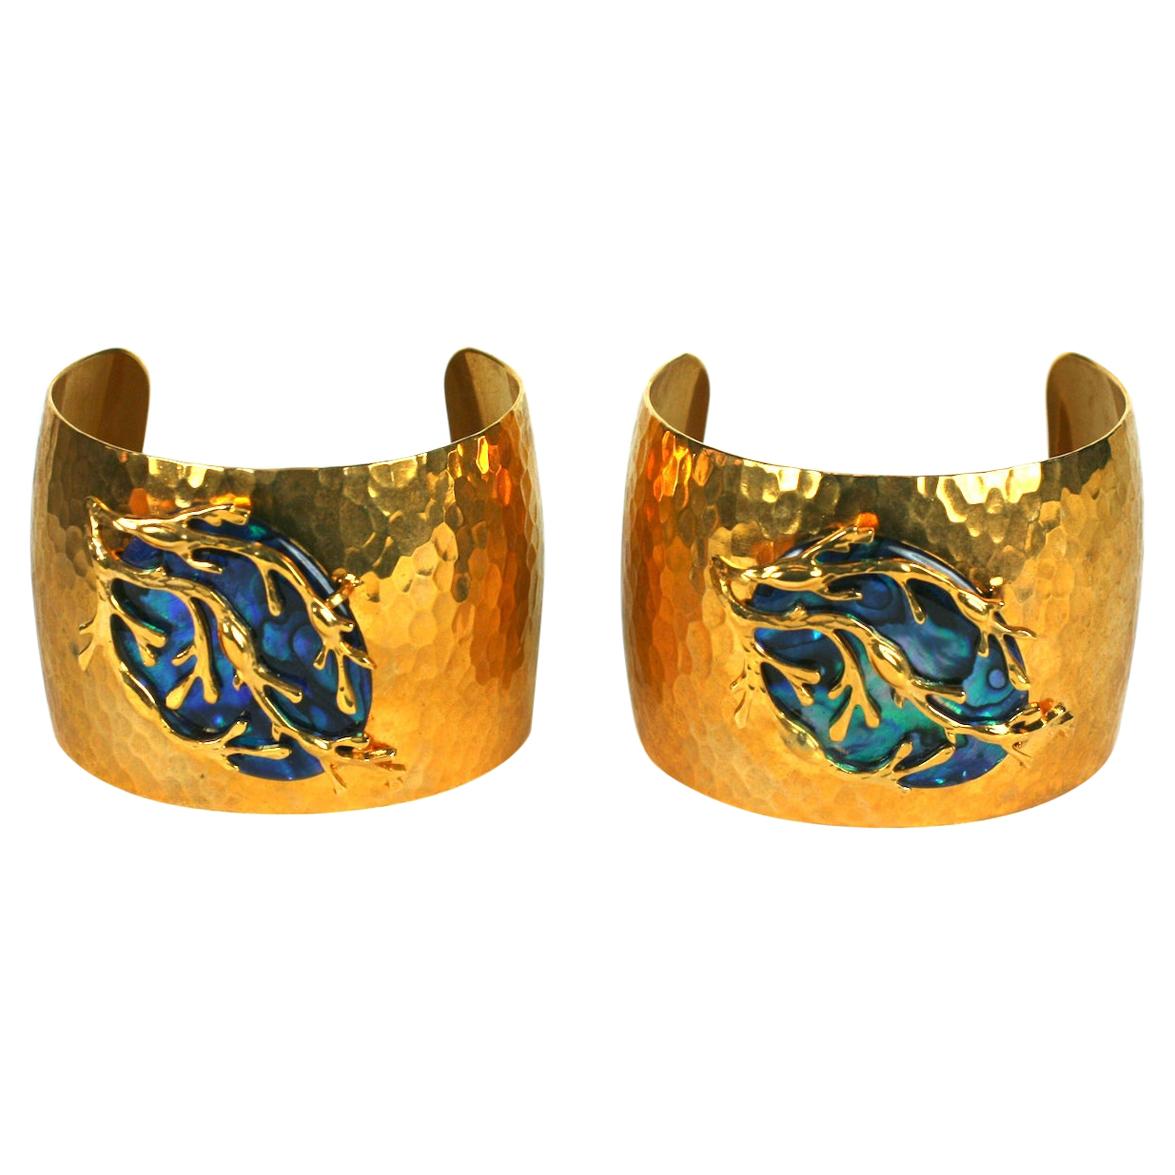 Mother of Pearl Seaweed Cuffs, MWLC For Sale